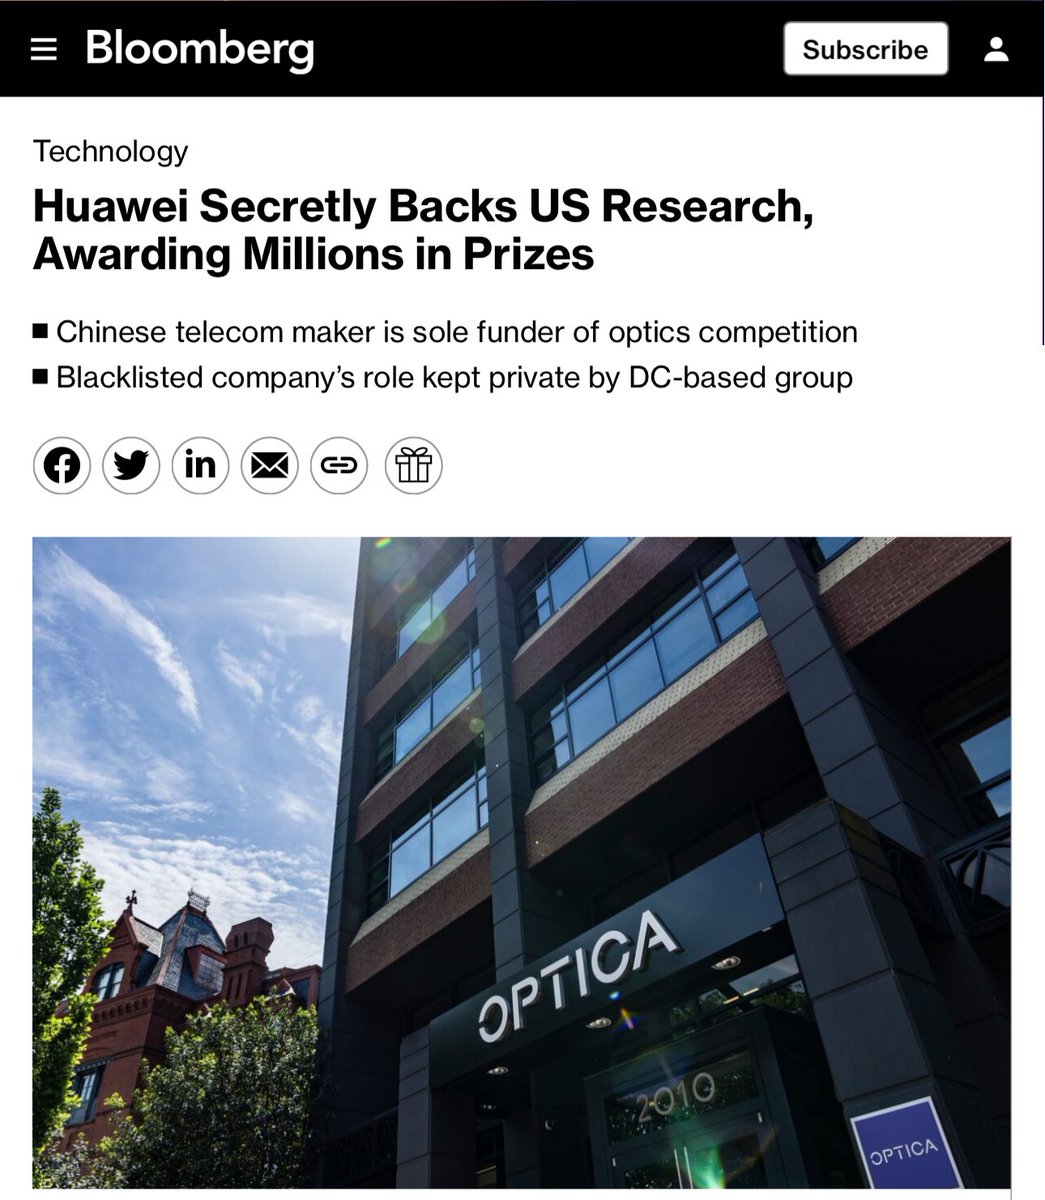 🚨 Huawei is secretly funding cutting-edge research at American universities including Harvard through Washington-based Optica Foundation, an arm of the nonprofit professional society Optica, whose members’ research on light underpins technologies such as communications,…